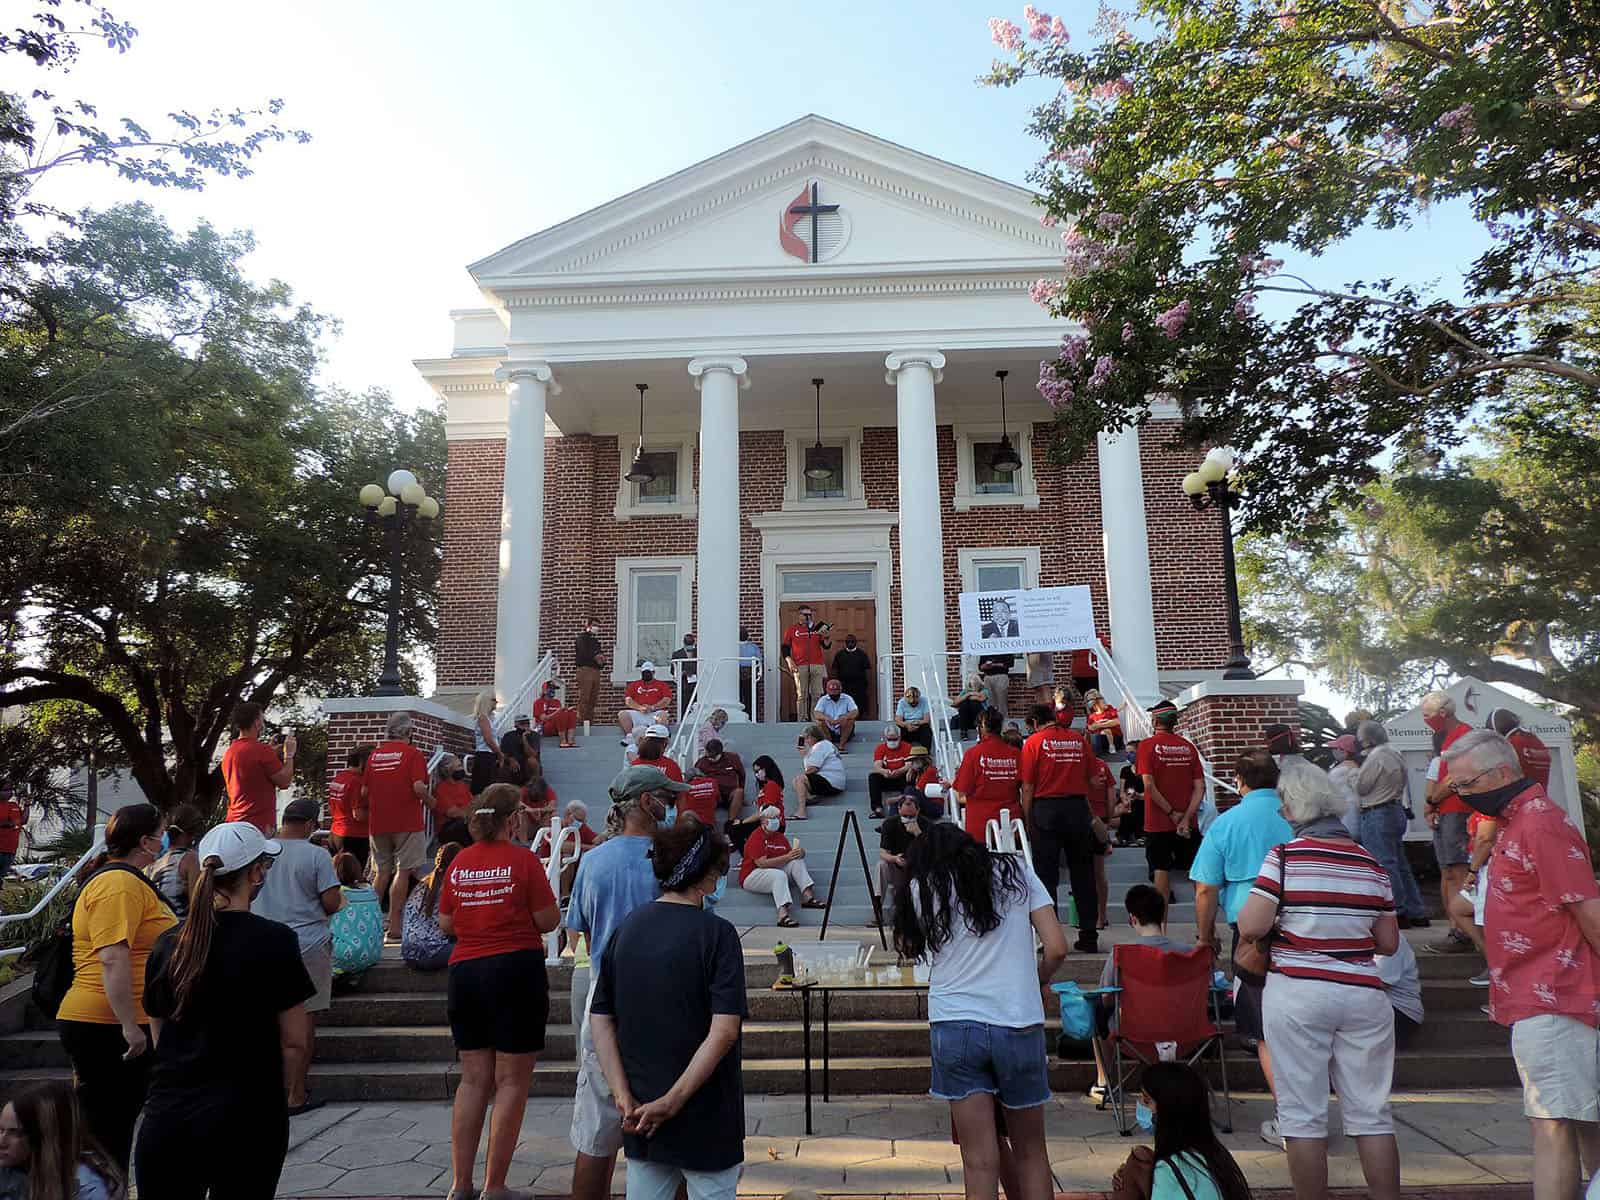 Residents participate in a community vigil of solidarity and hope May 31 at Memorial United Methodist Church in Fernandina Beach. The church is one of 66 that took advantage of the option to pay interest only on their Development Fund loan from the foundation during the COVID-19 outbreak. (MUMC photo)